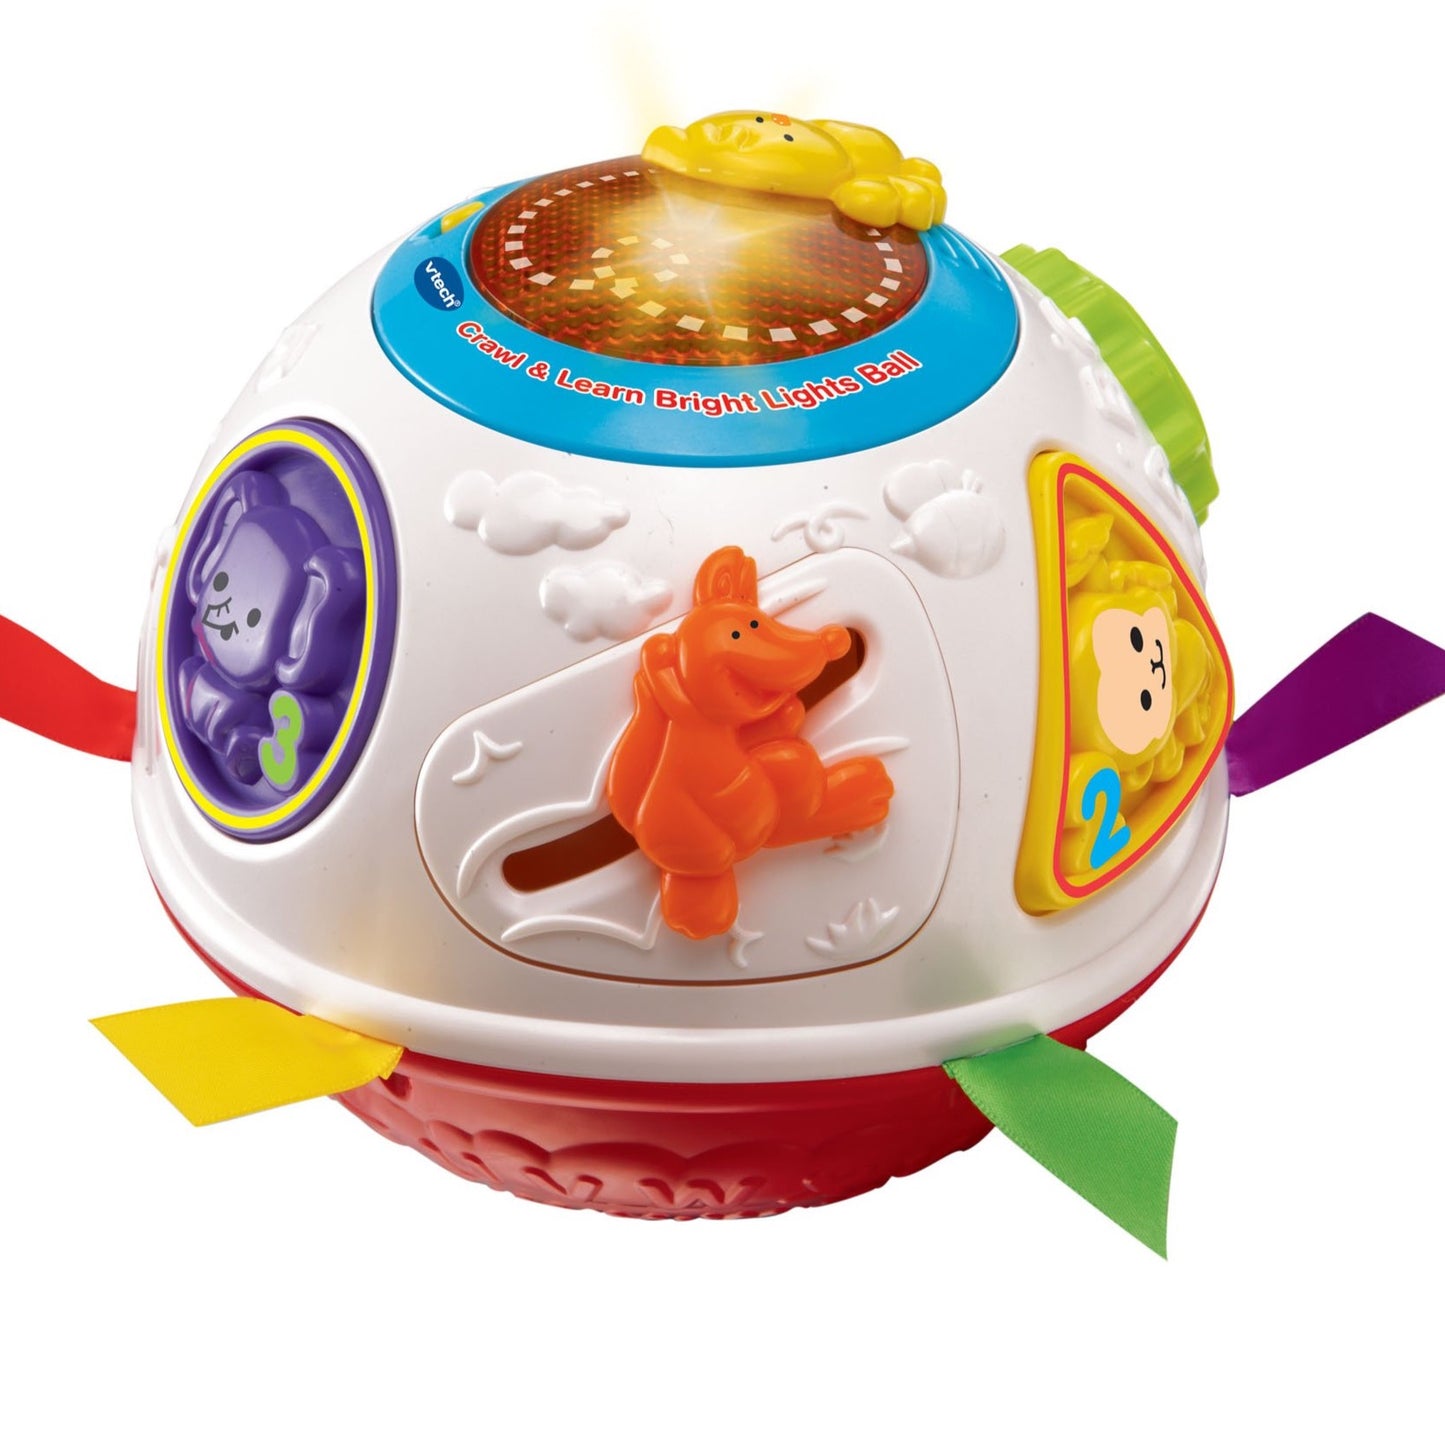 VTech Crawl and Learn Bright Ball